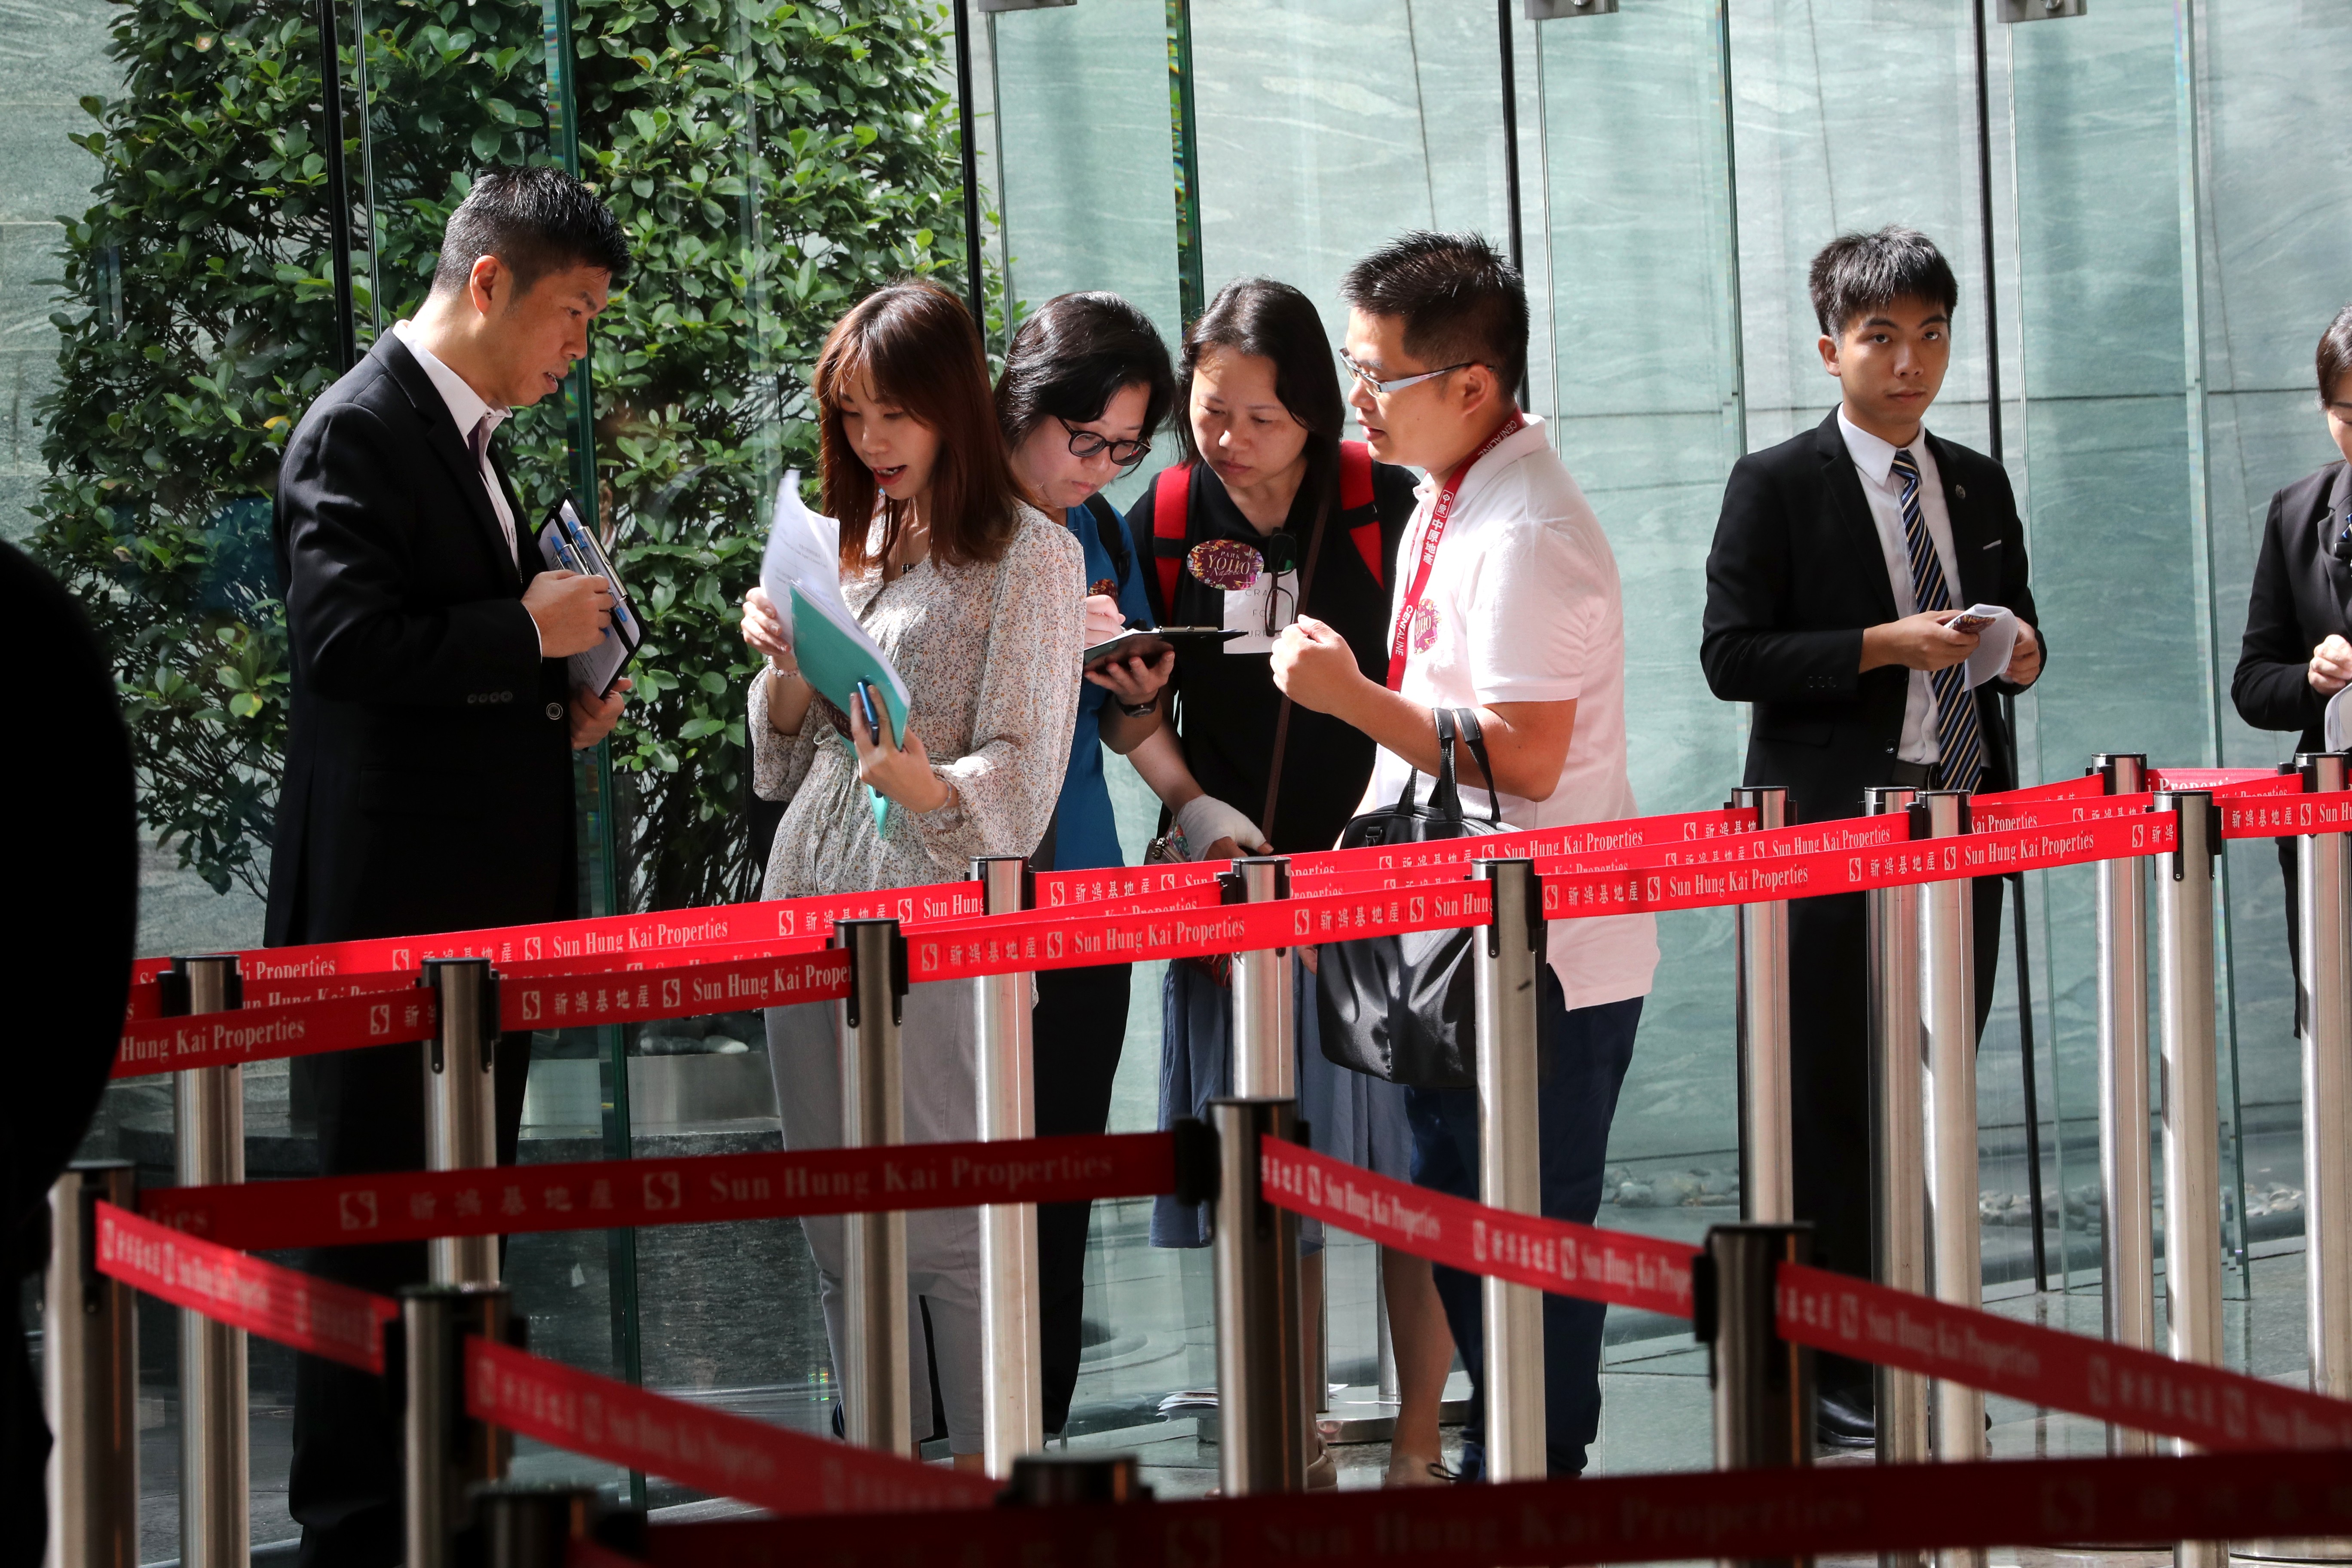 Potential buyers queues for Sun Hung Kai Properties' 145 units at Park Yoho Napoli on 27 July 2019. Photo: SCMP / Edward Wong